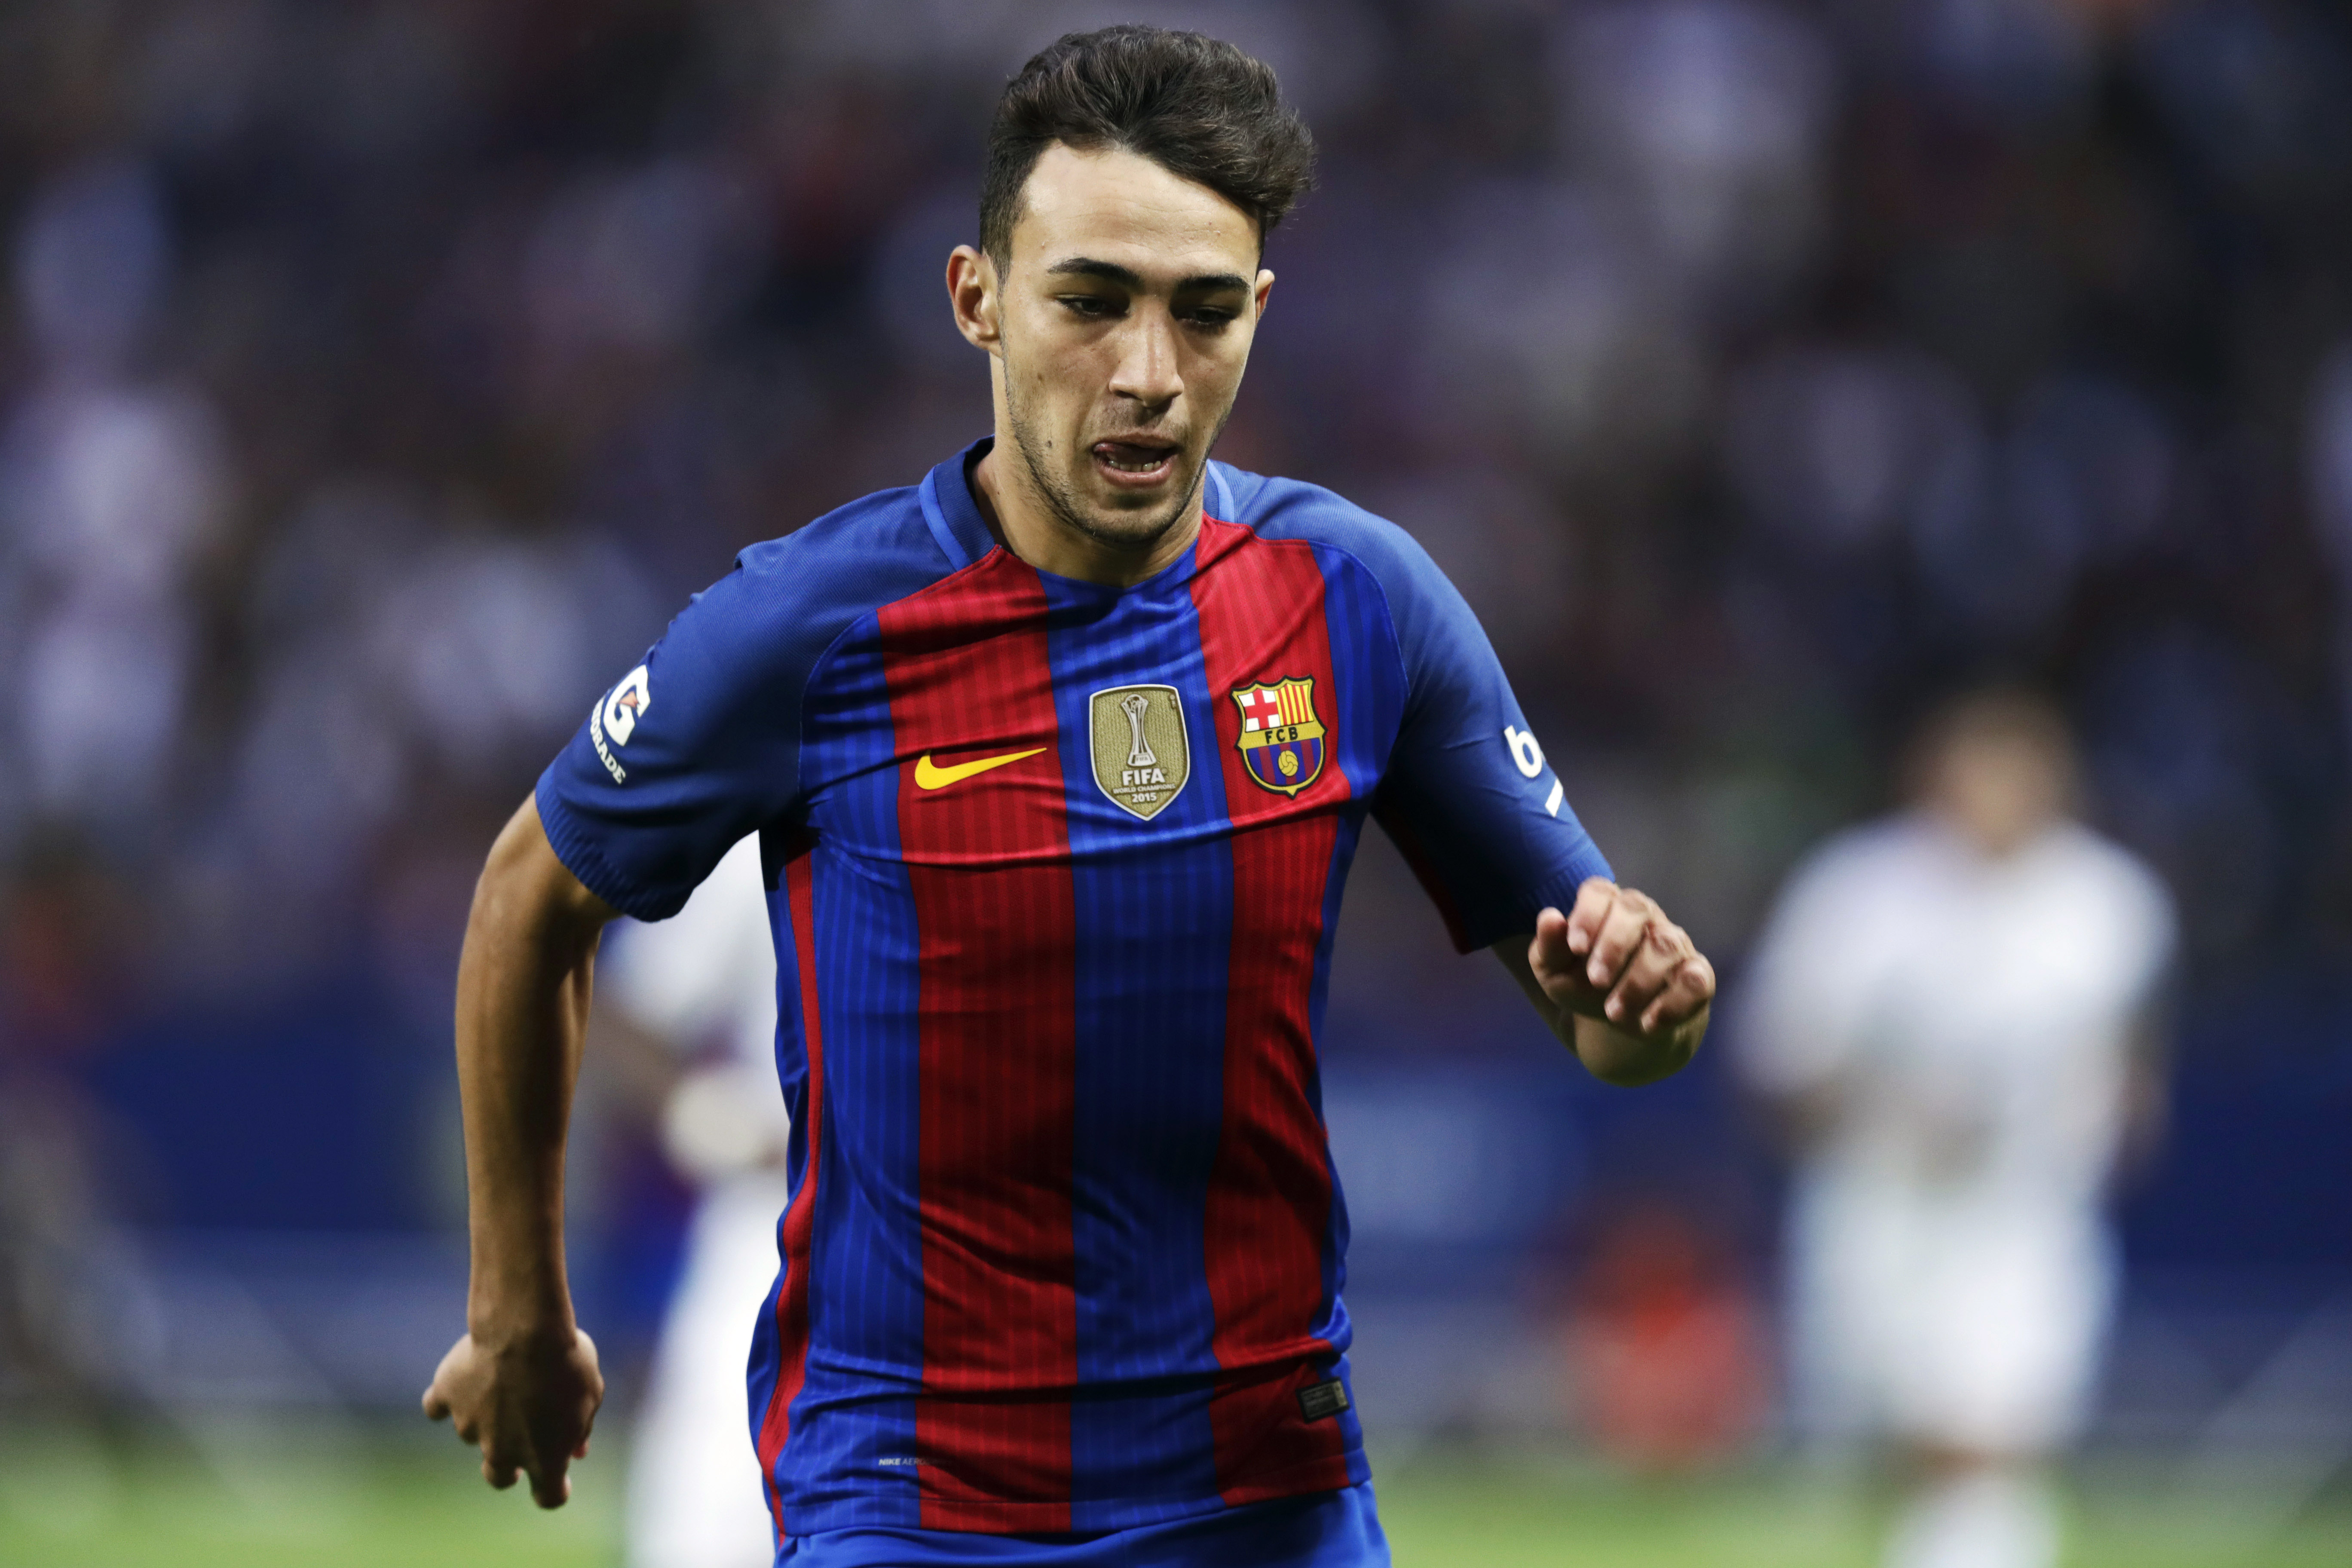 SOLNA, SWEDEN - AUGUST 03: Munir El Haddadi of FC Barcelona during the International Champions Cup match between Leicester City FC and FC Barcelona at Friends arena on August 3, 2016 in Solna, Sweden. (Photo by Nils Petter Nilsson/Ombrello/Getty Images)